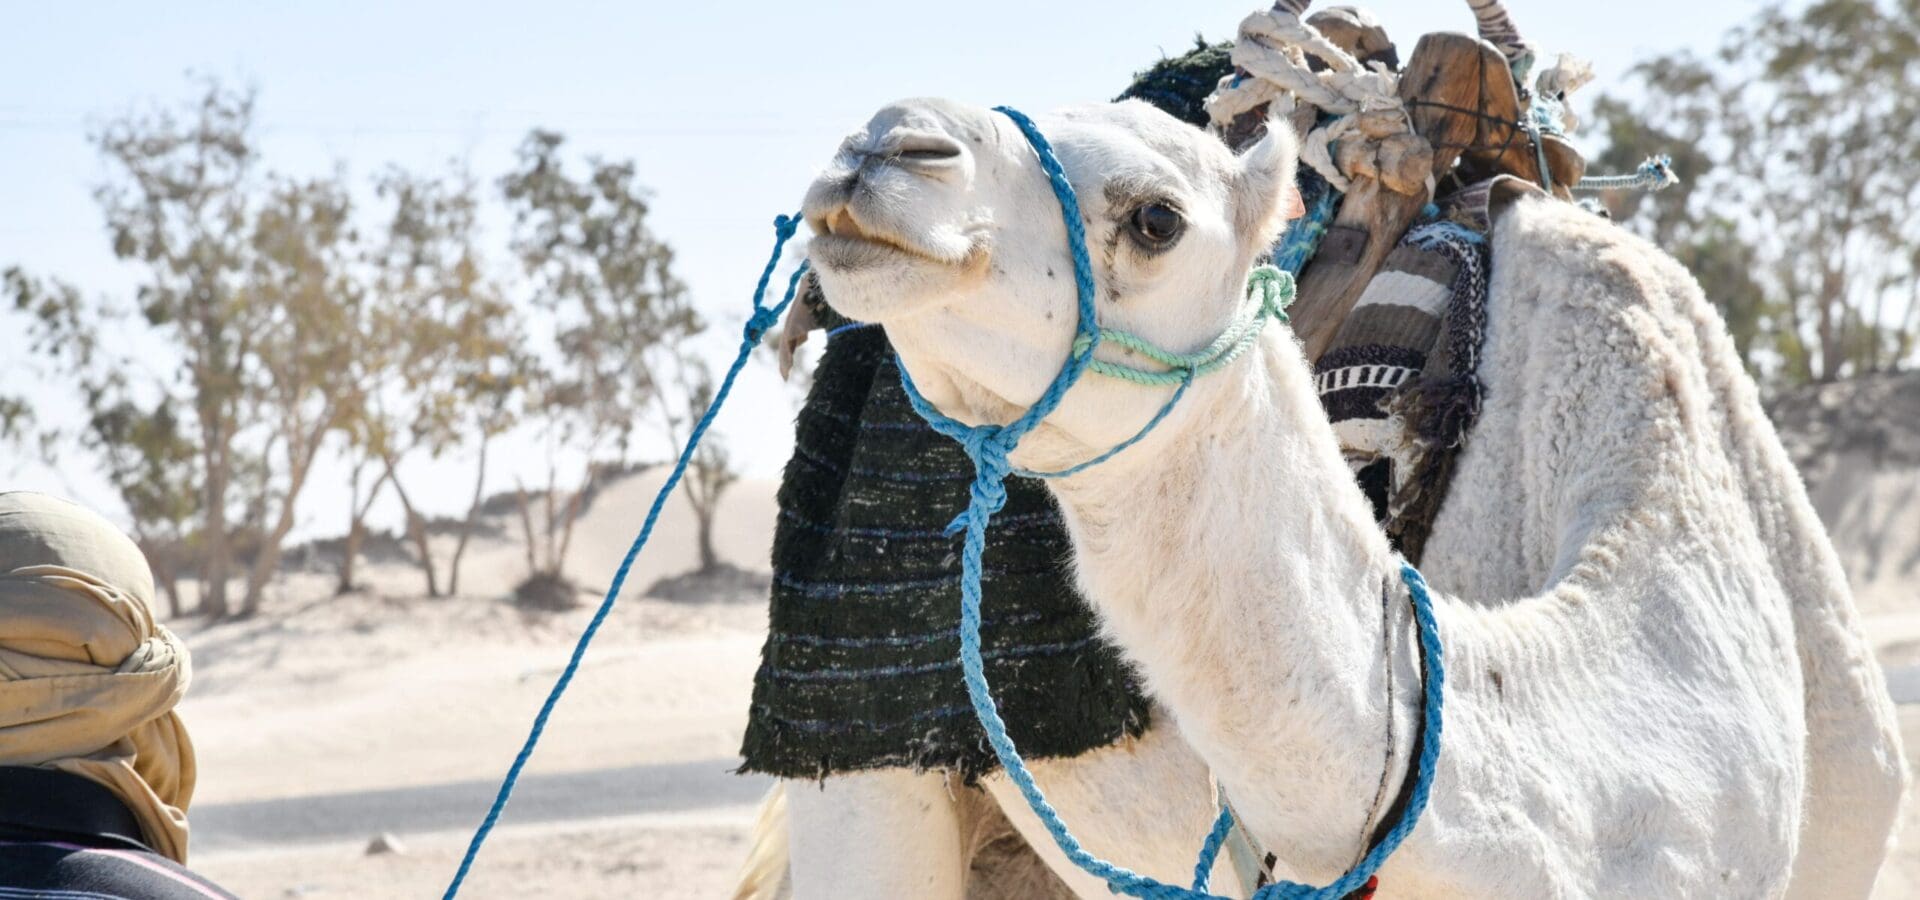 A camel with suspected scabies was treated by SPANA vets at a mobile clinic in Tunisia